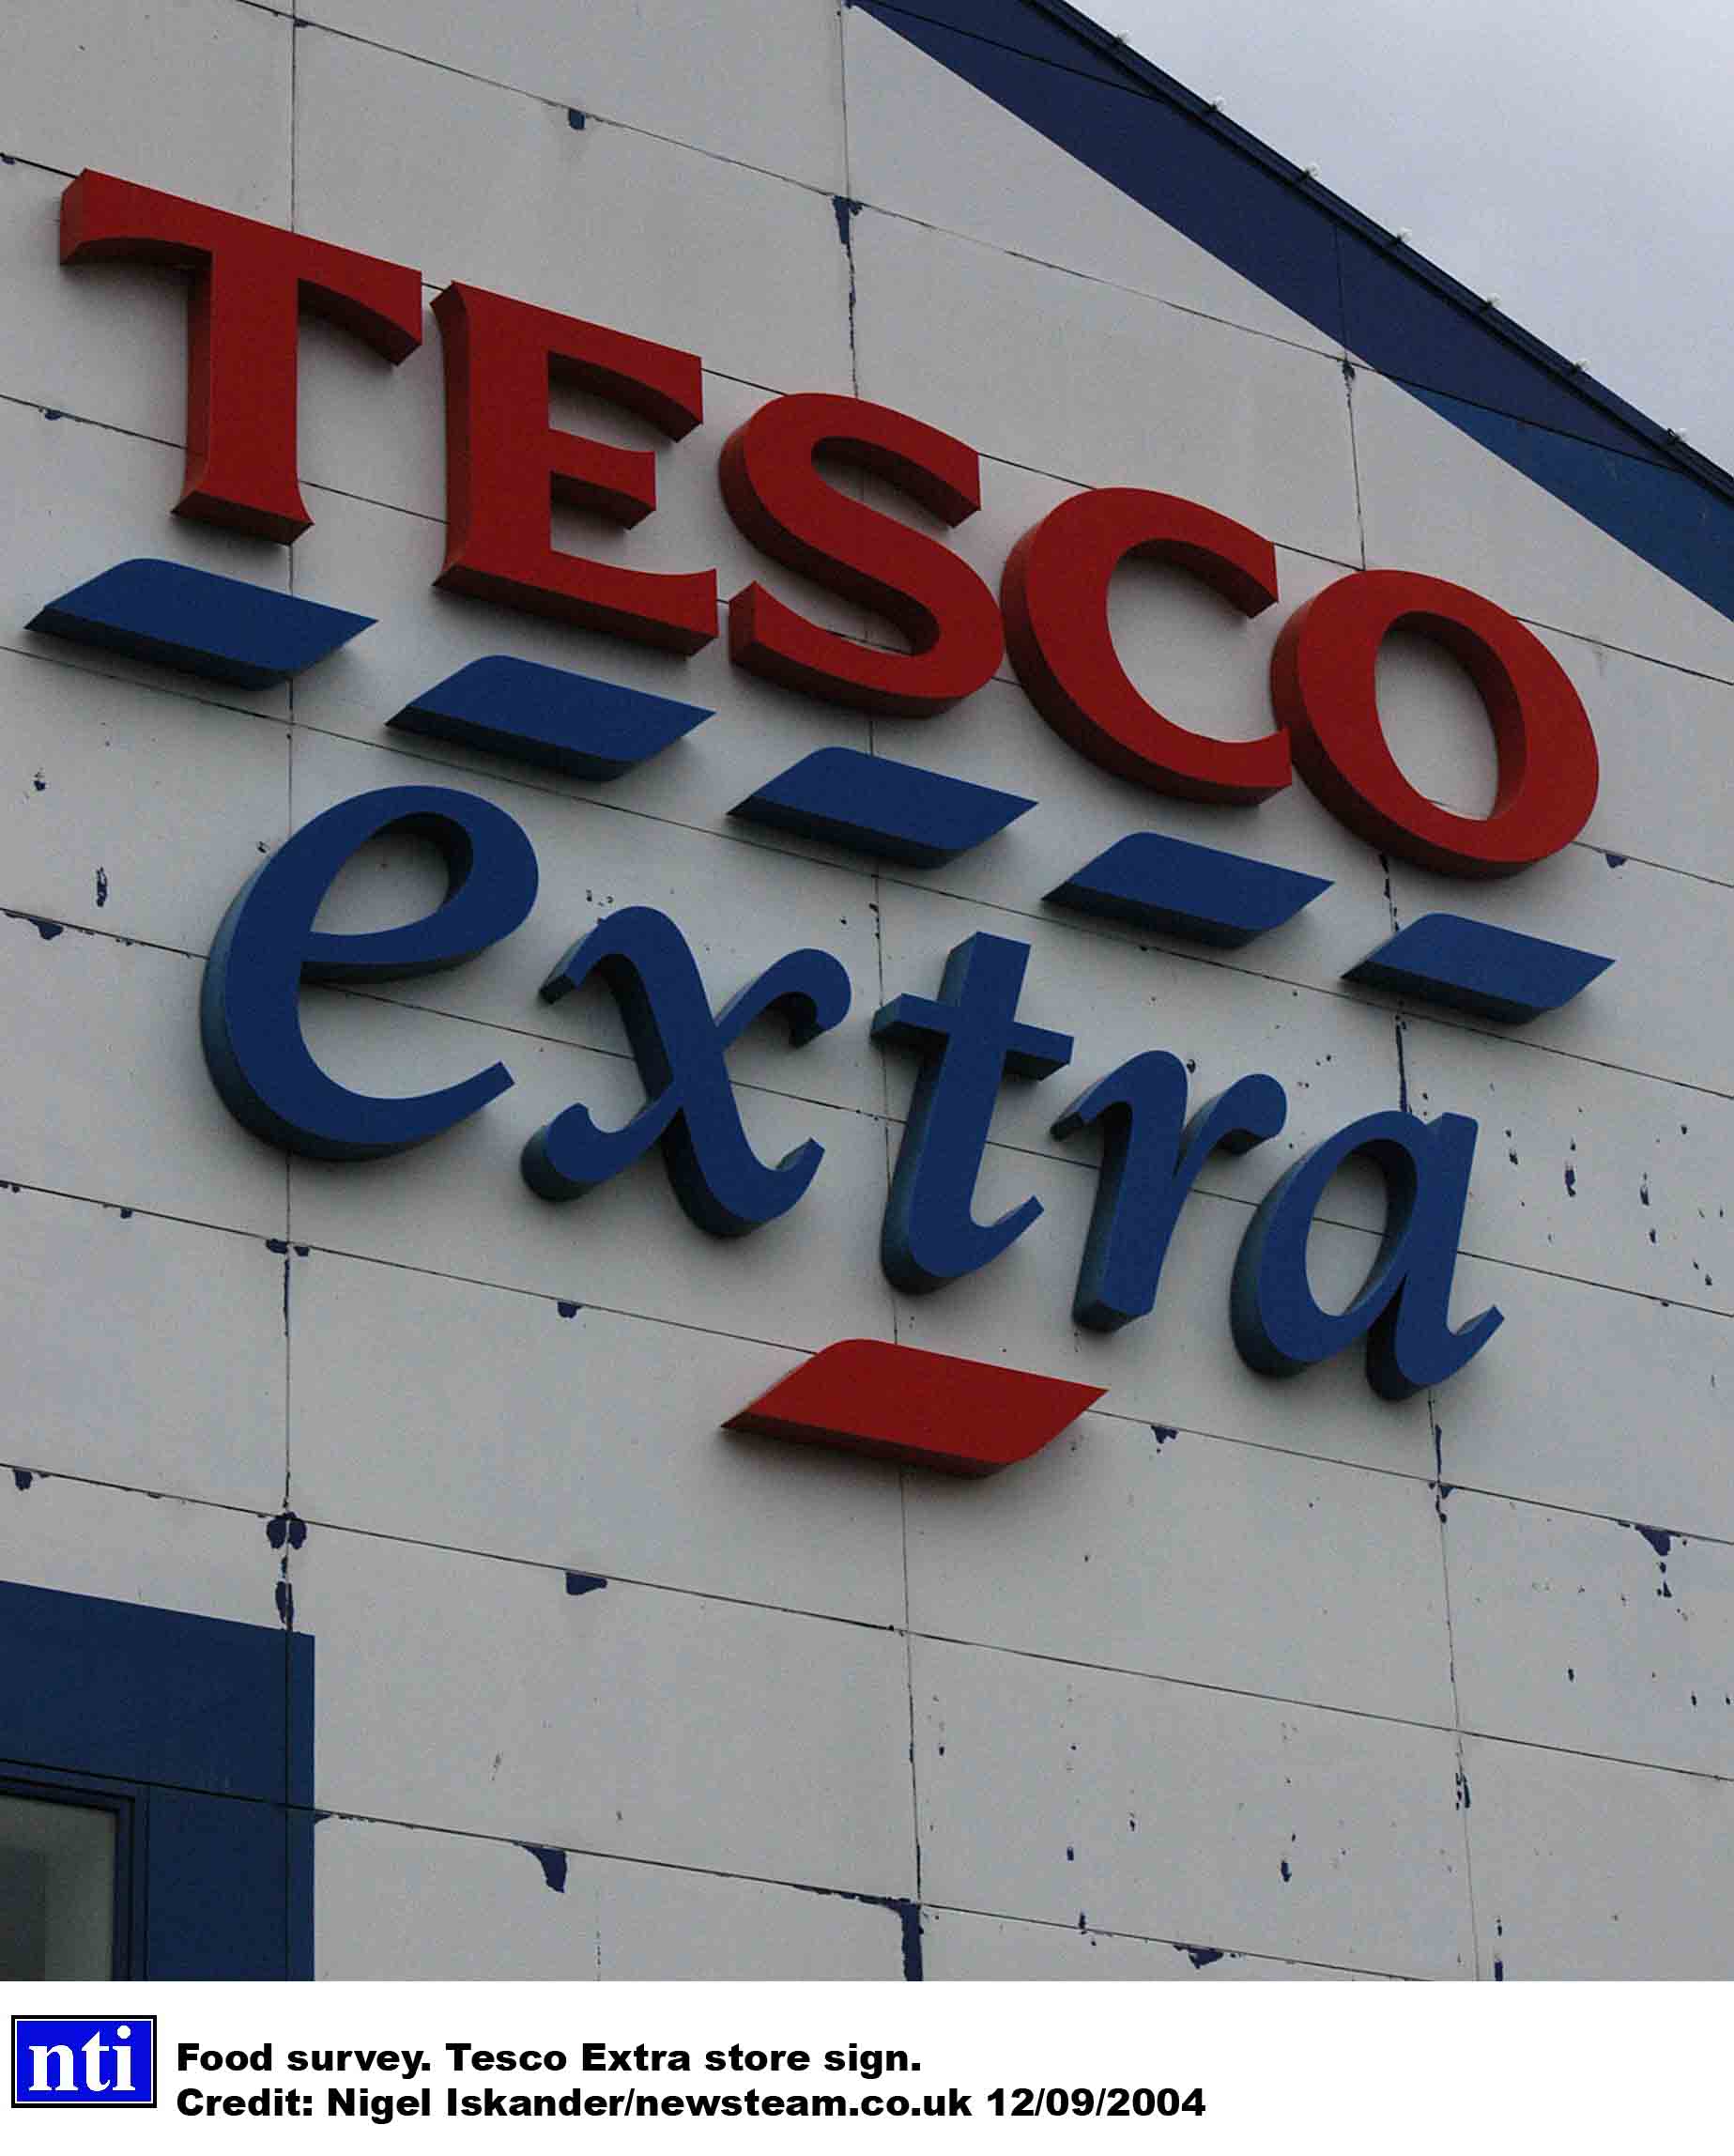 Shoppers camp out to try new Tesco